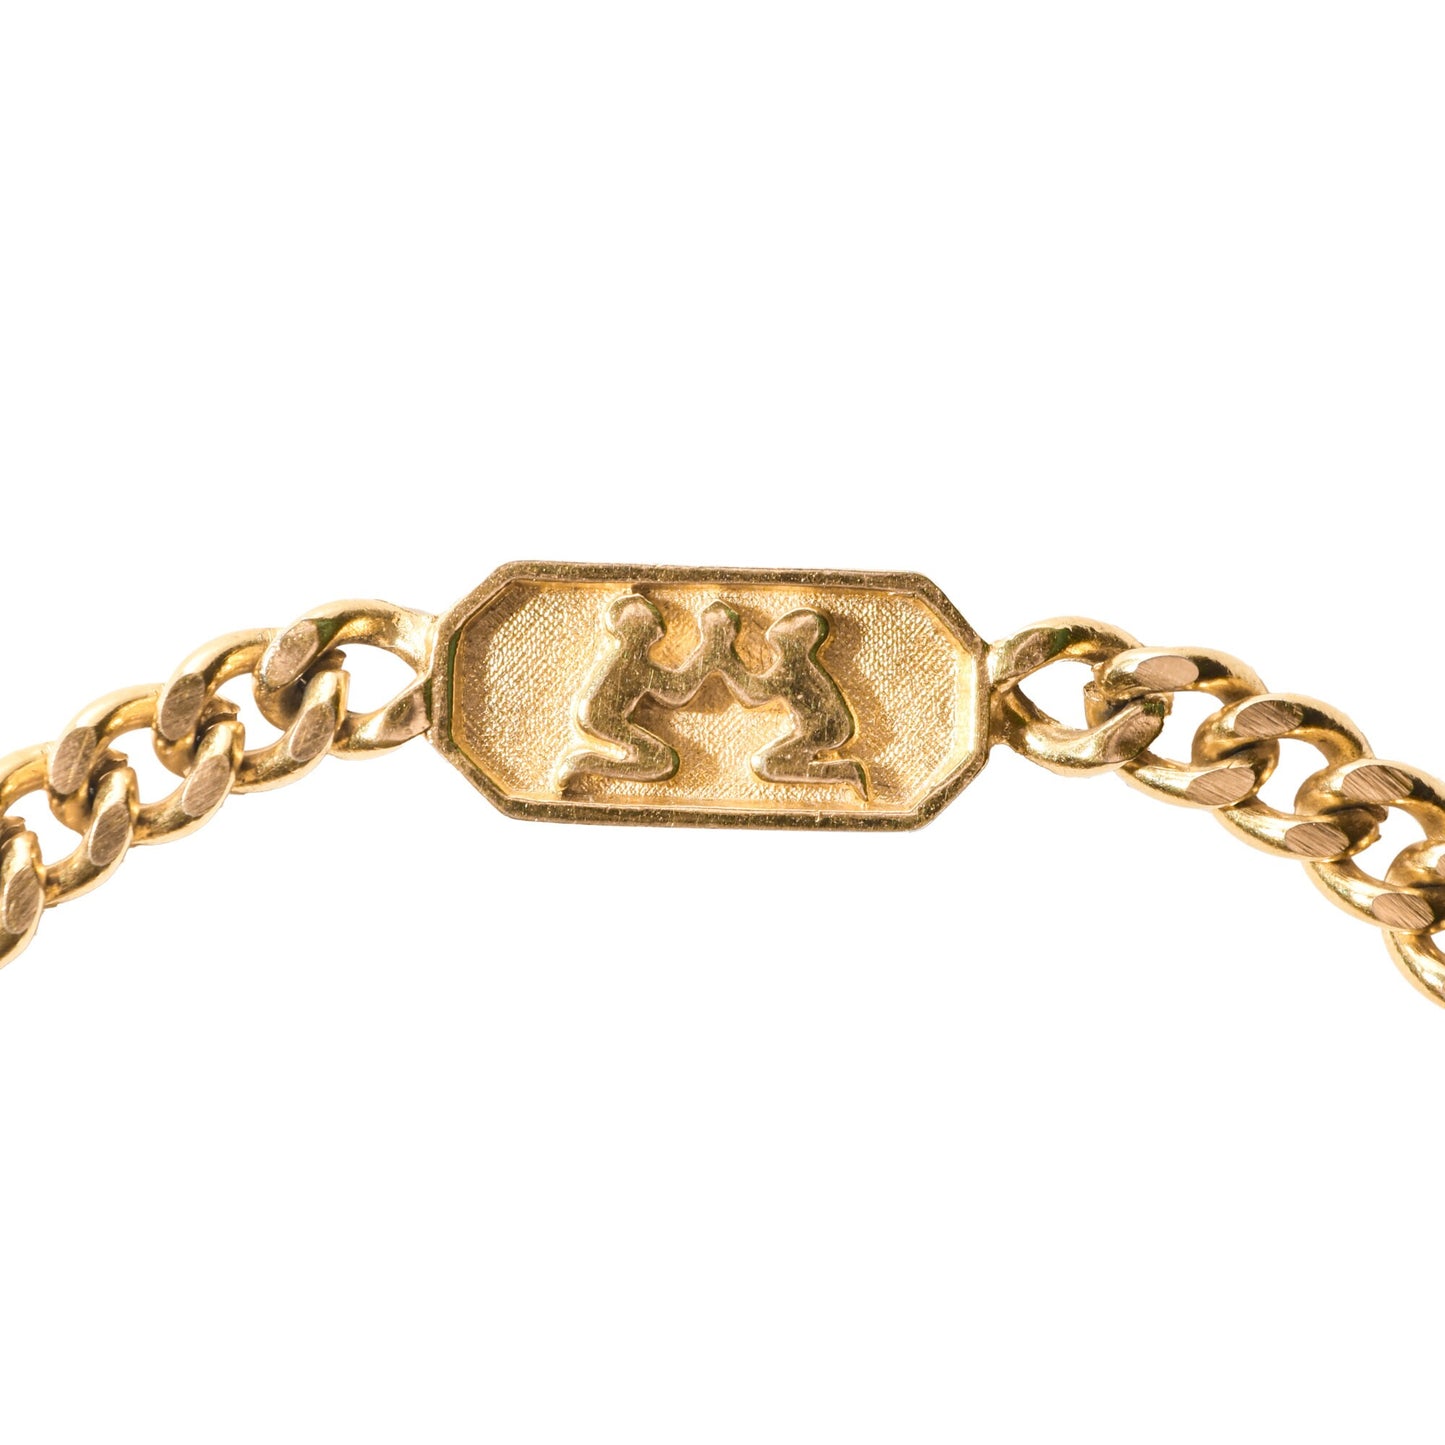 Gold-tone Trifari Gemini zodiac sign bracelet with a 5mm curb link chain, depicting astrology symbol, 7 inches in length